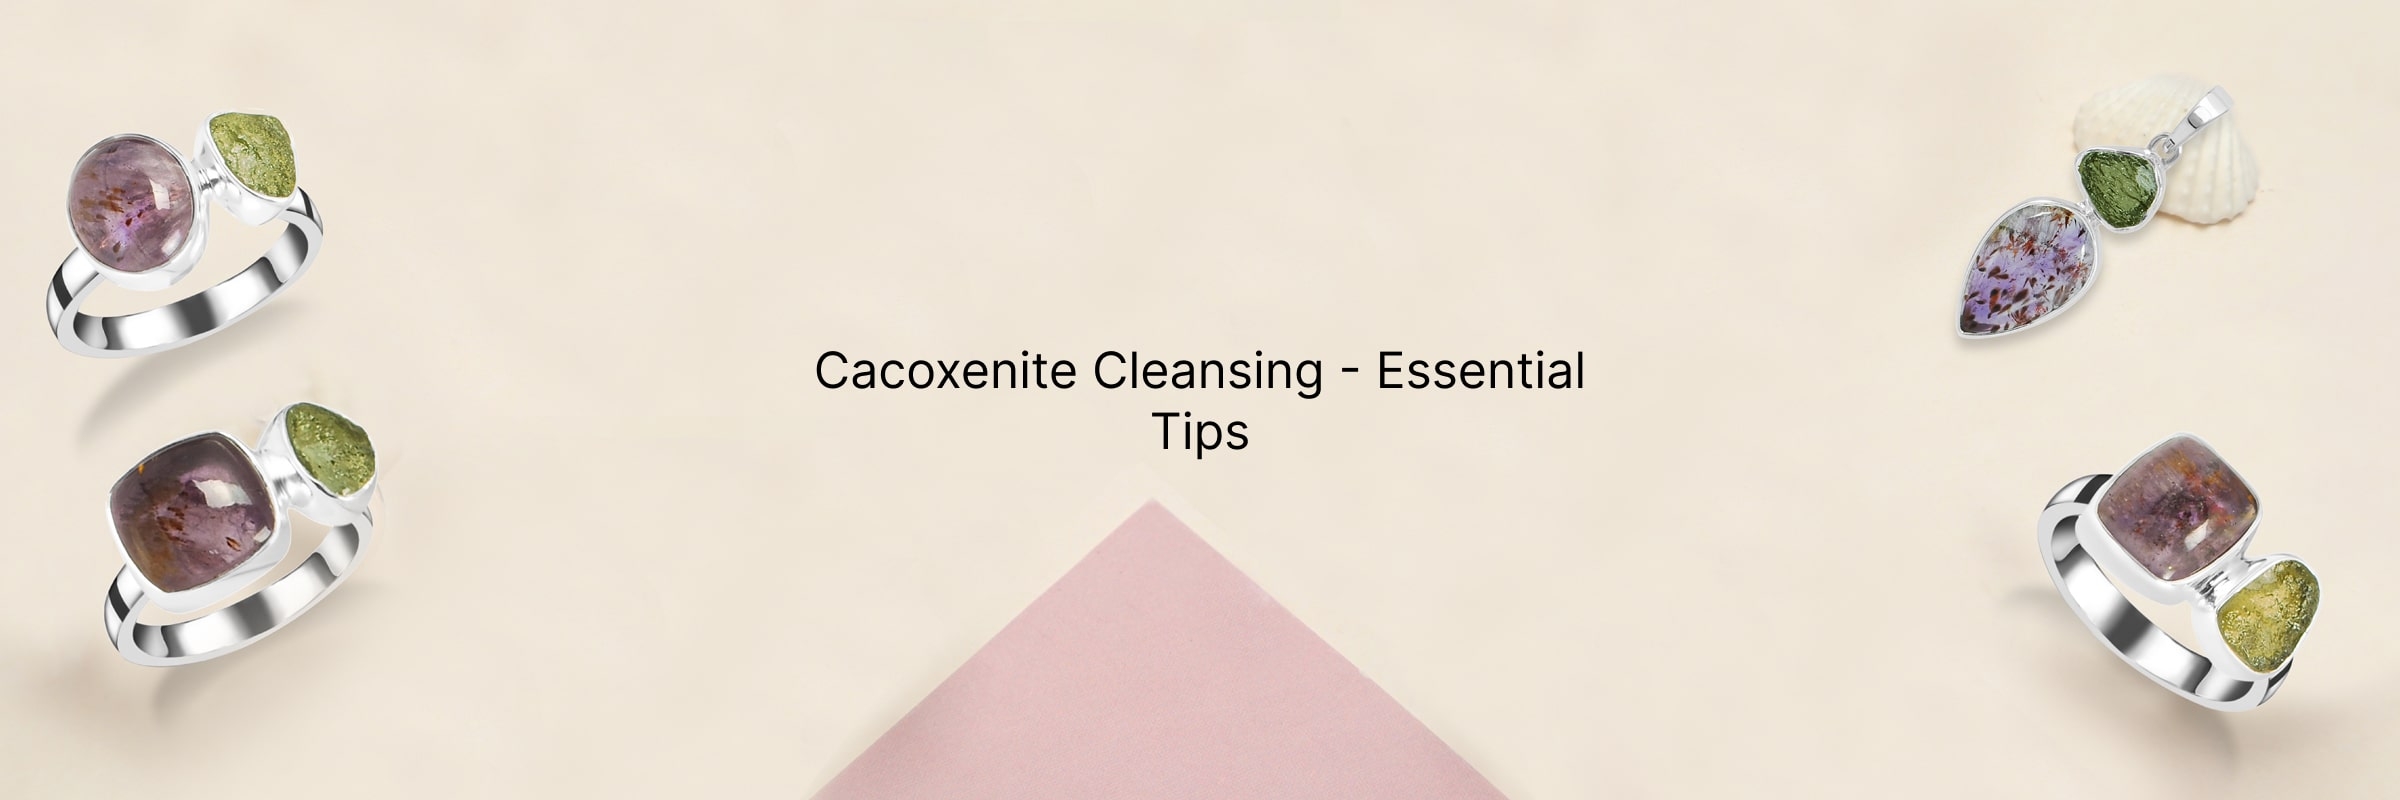 How To Cleanse The Cacoxenite